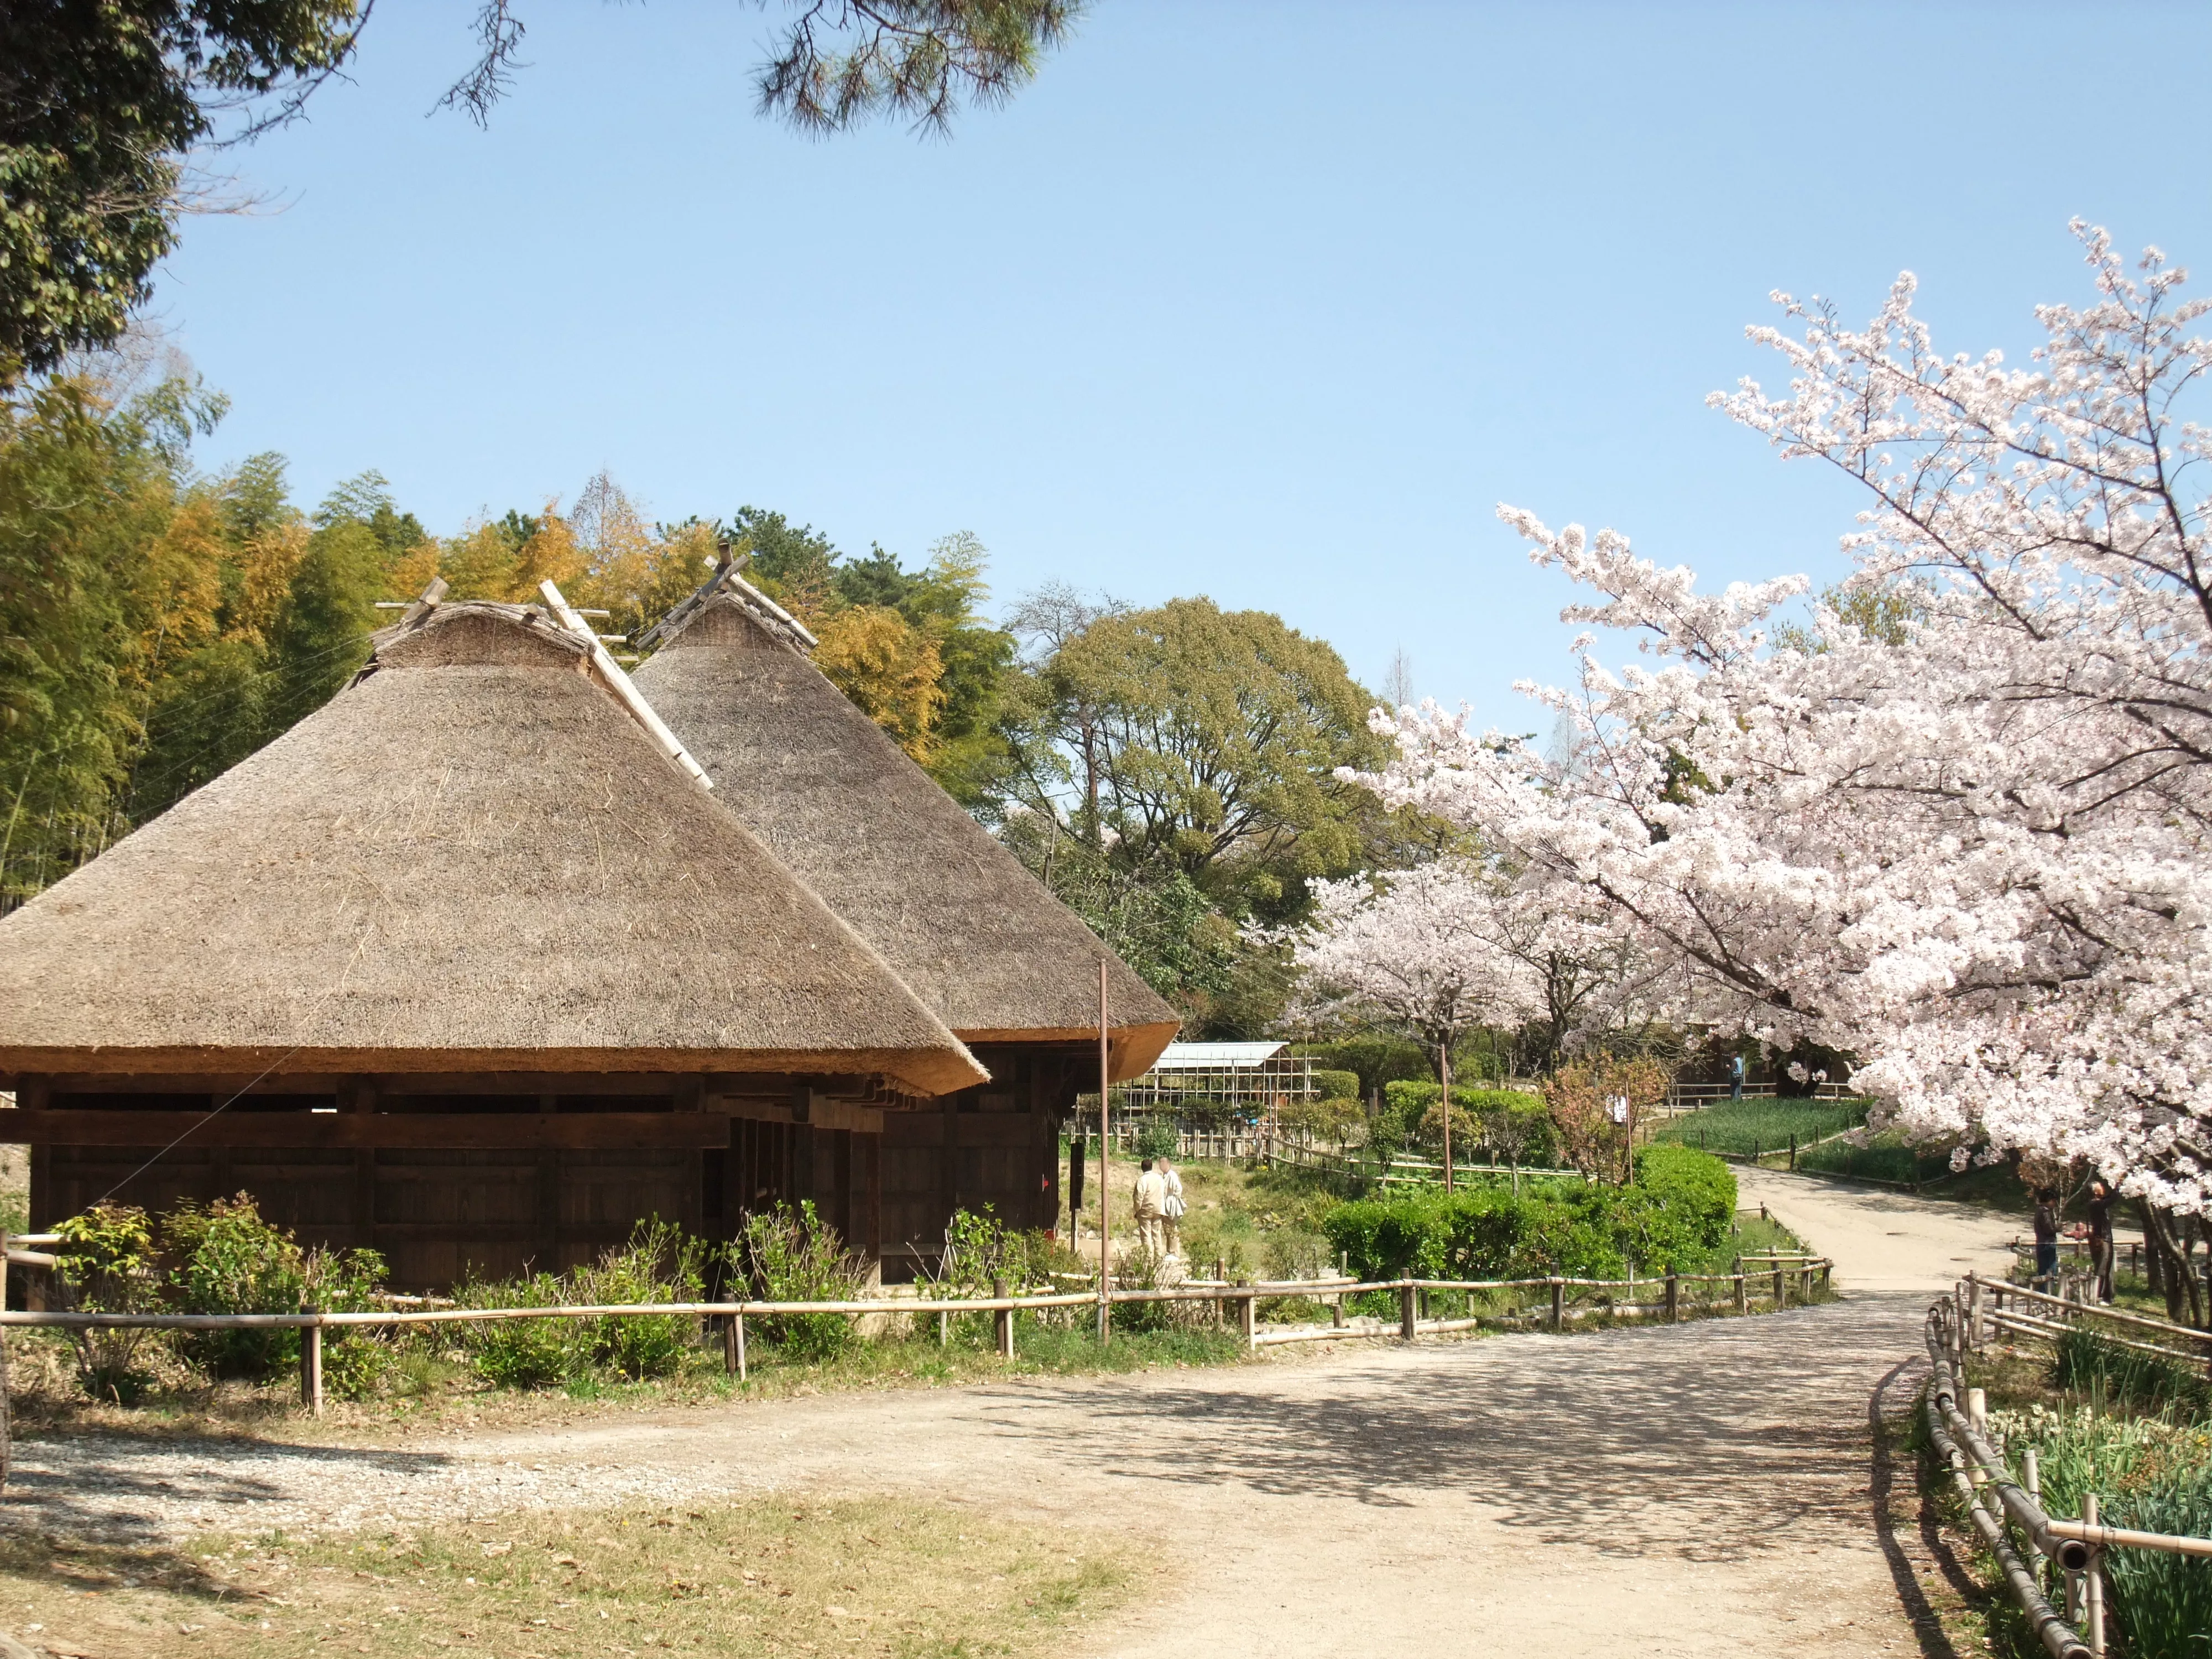 Hattori Ryokuchi Park in Japan, East Asia | Parks - Rated 3.3